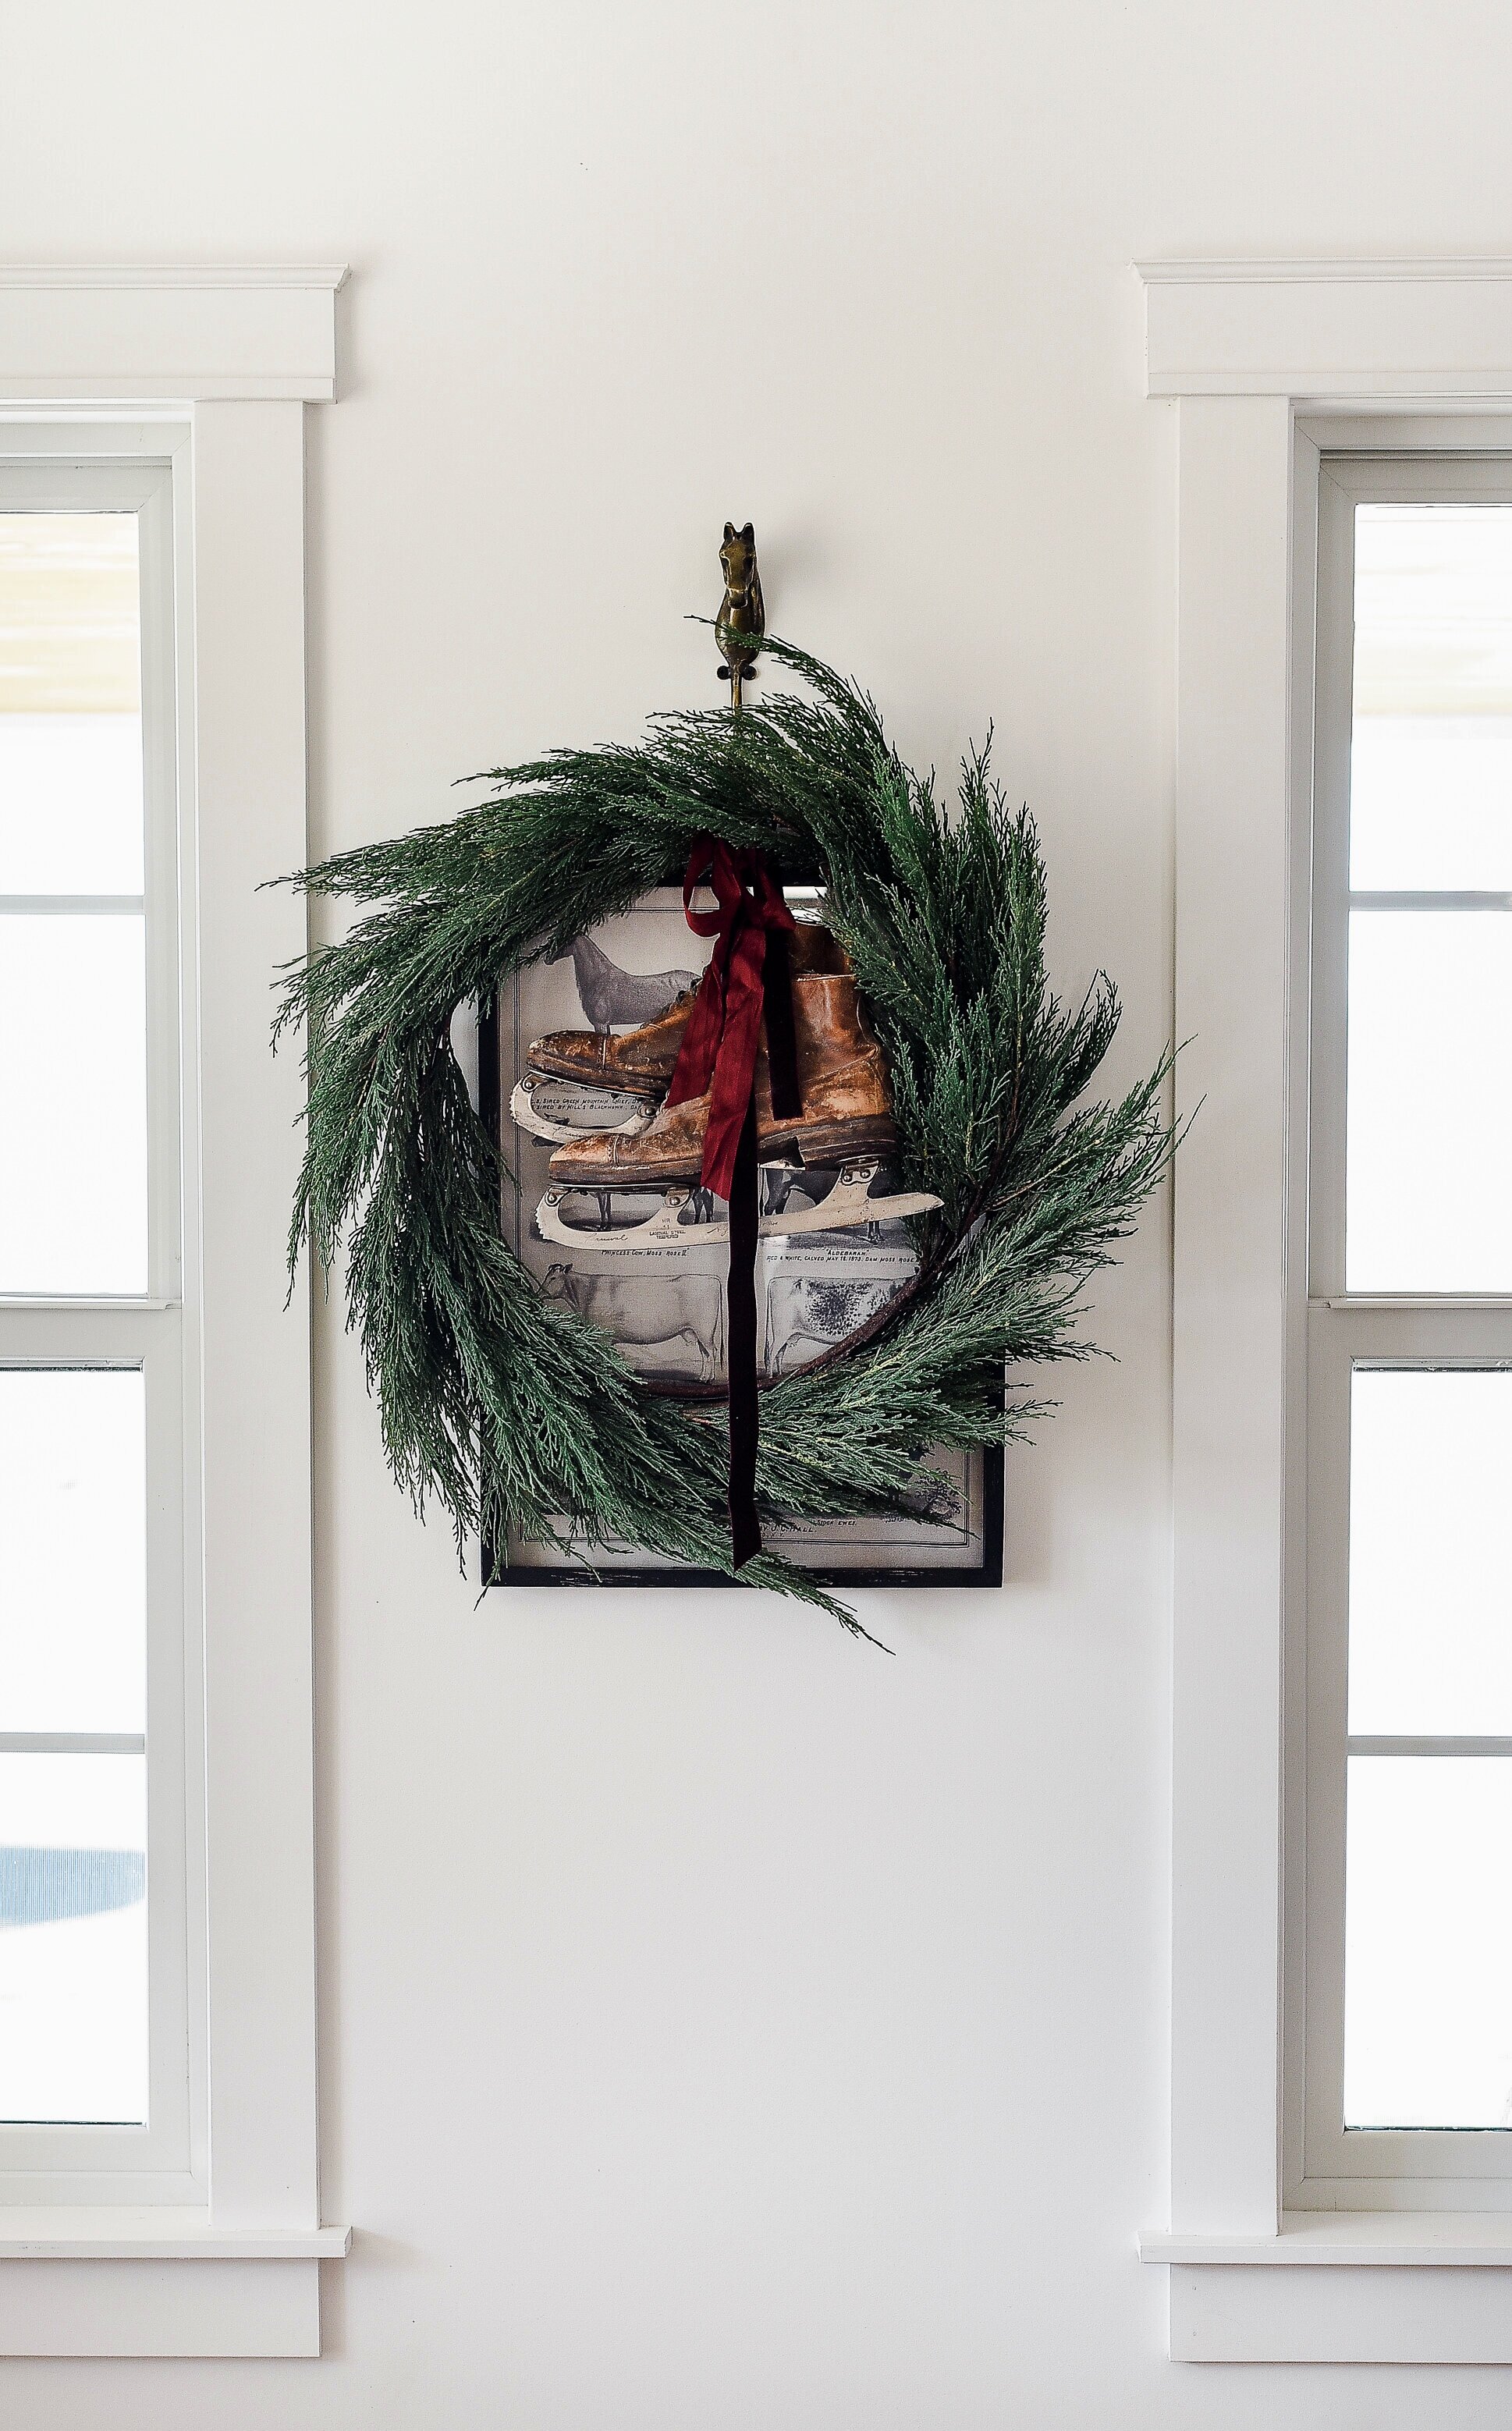 Get inspired to add little Christmas touches as the holidays near! These simple decorating ideas will help you dress up your living room!